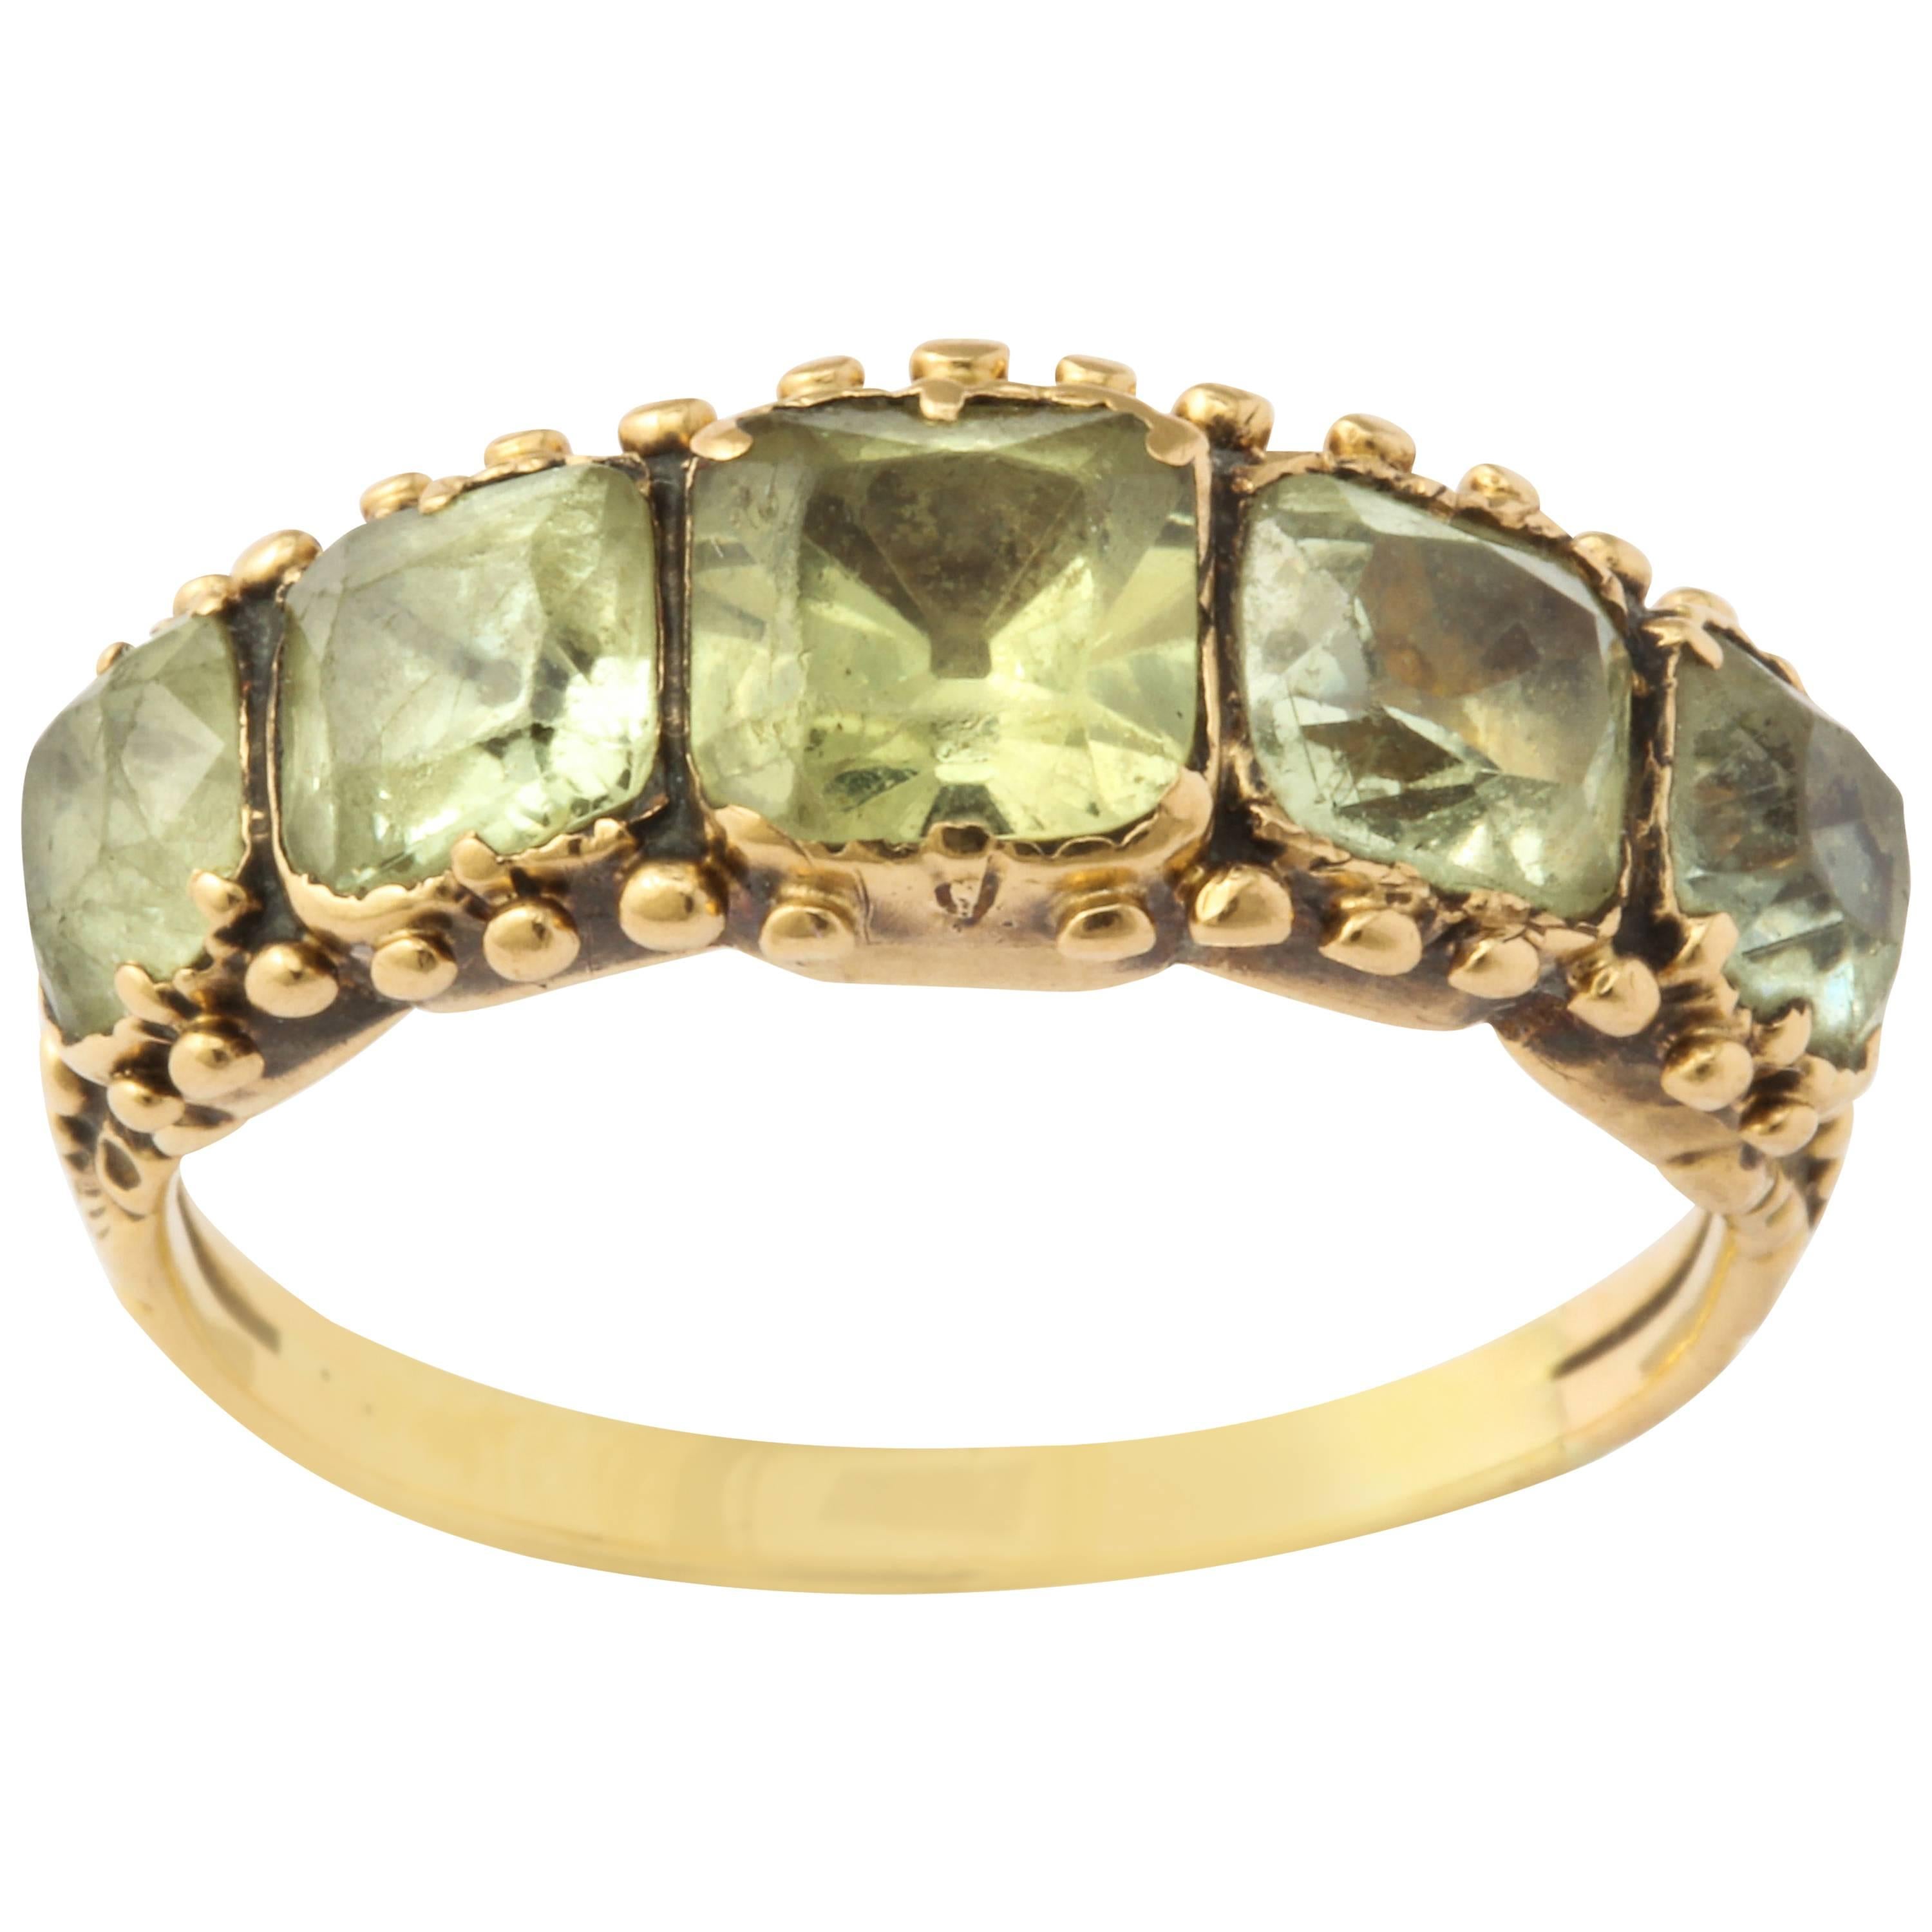 Five Square Cut Chrysolite Gold Band Ring 